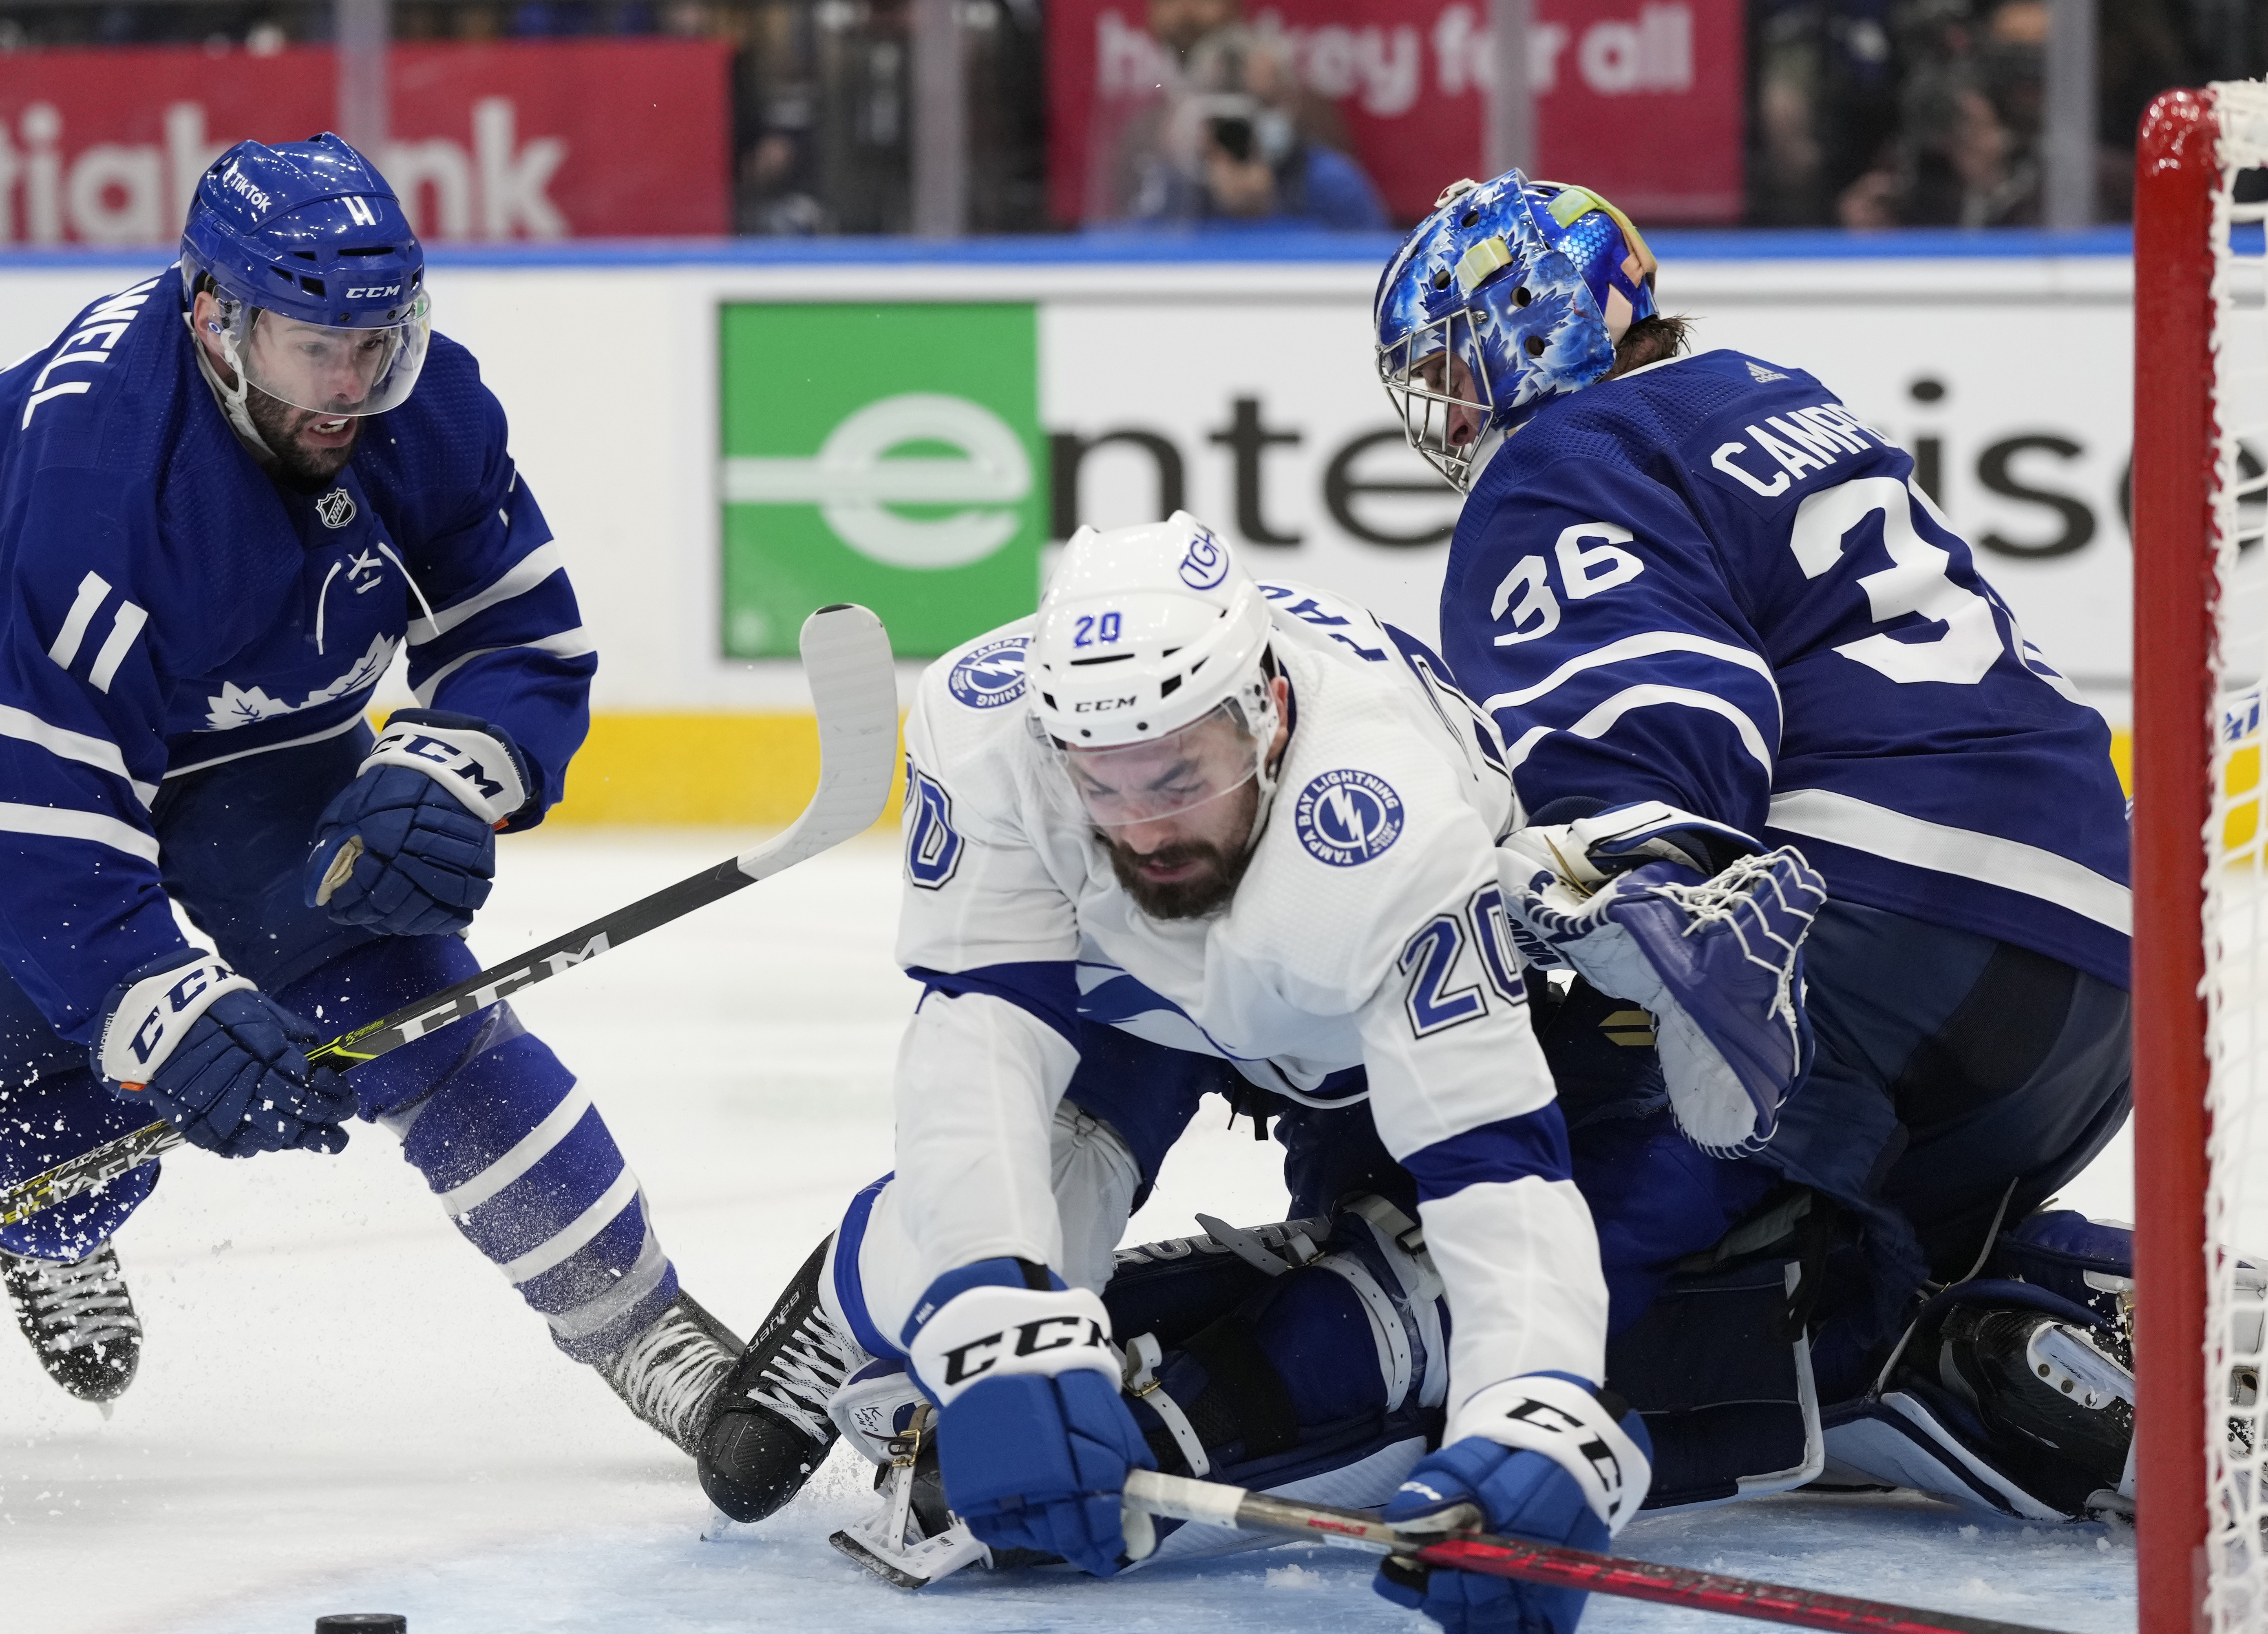 Paul scores 2, Tampa Bay Lightning hold off Maple Leafs 2-1 in Game 7